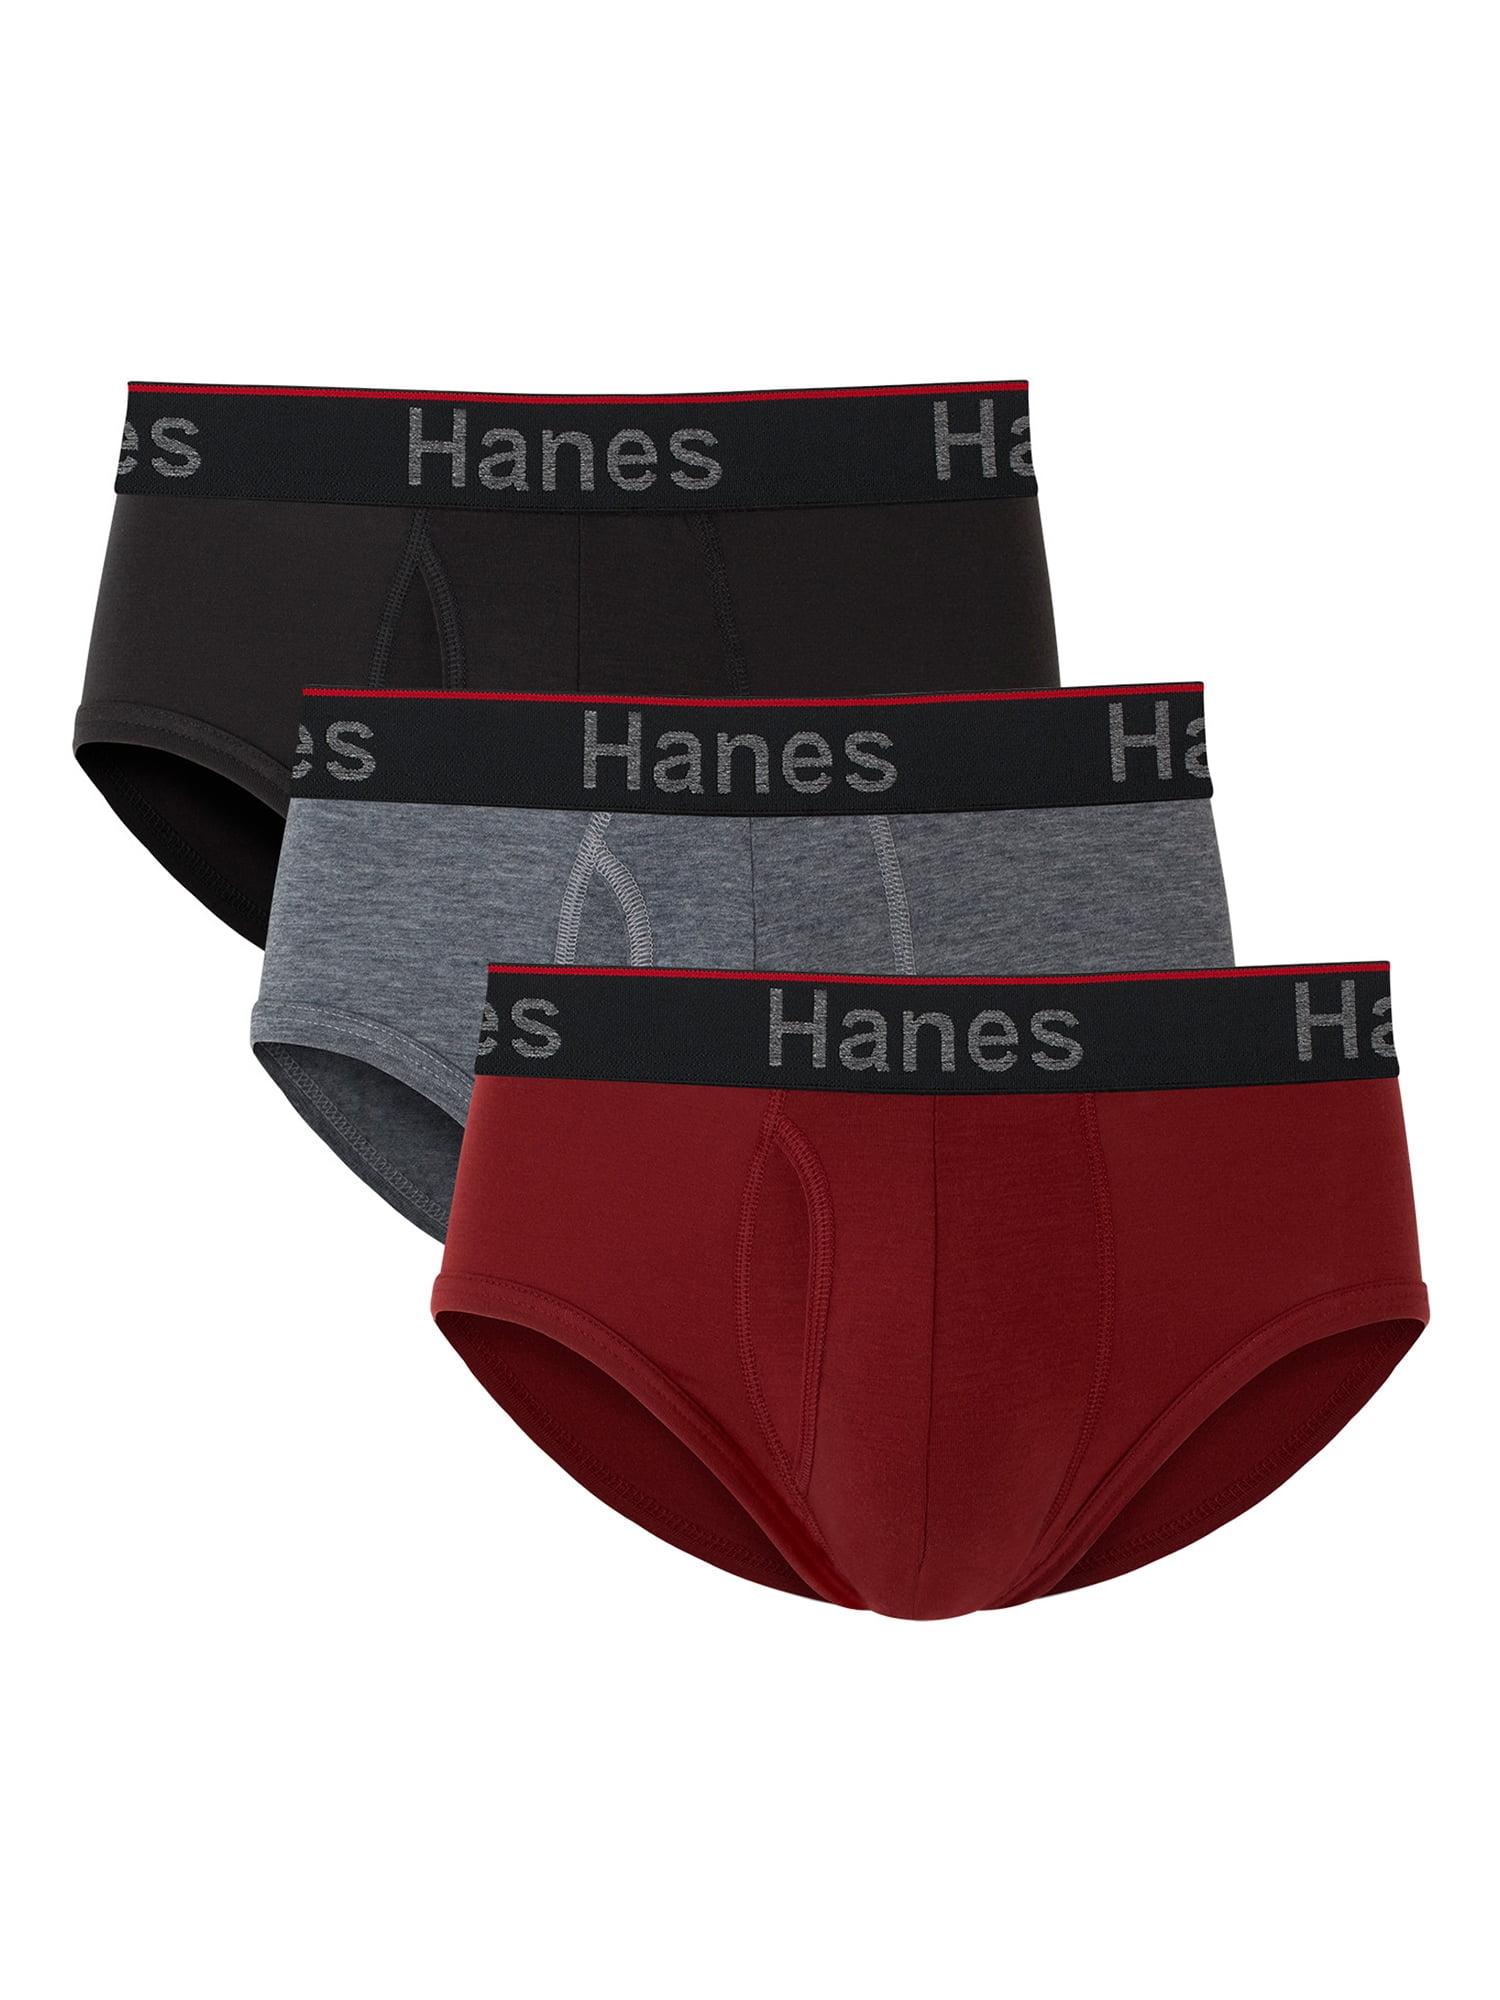 Hanes Comfort Flex Fit Men's Briefs with Total Support Pouch, 3